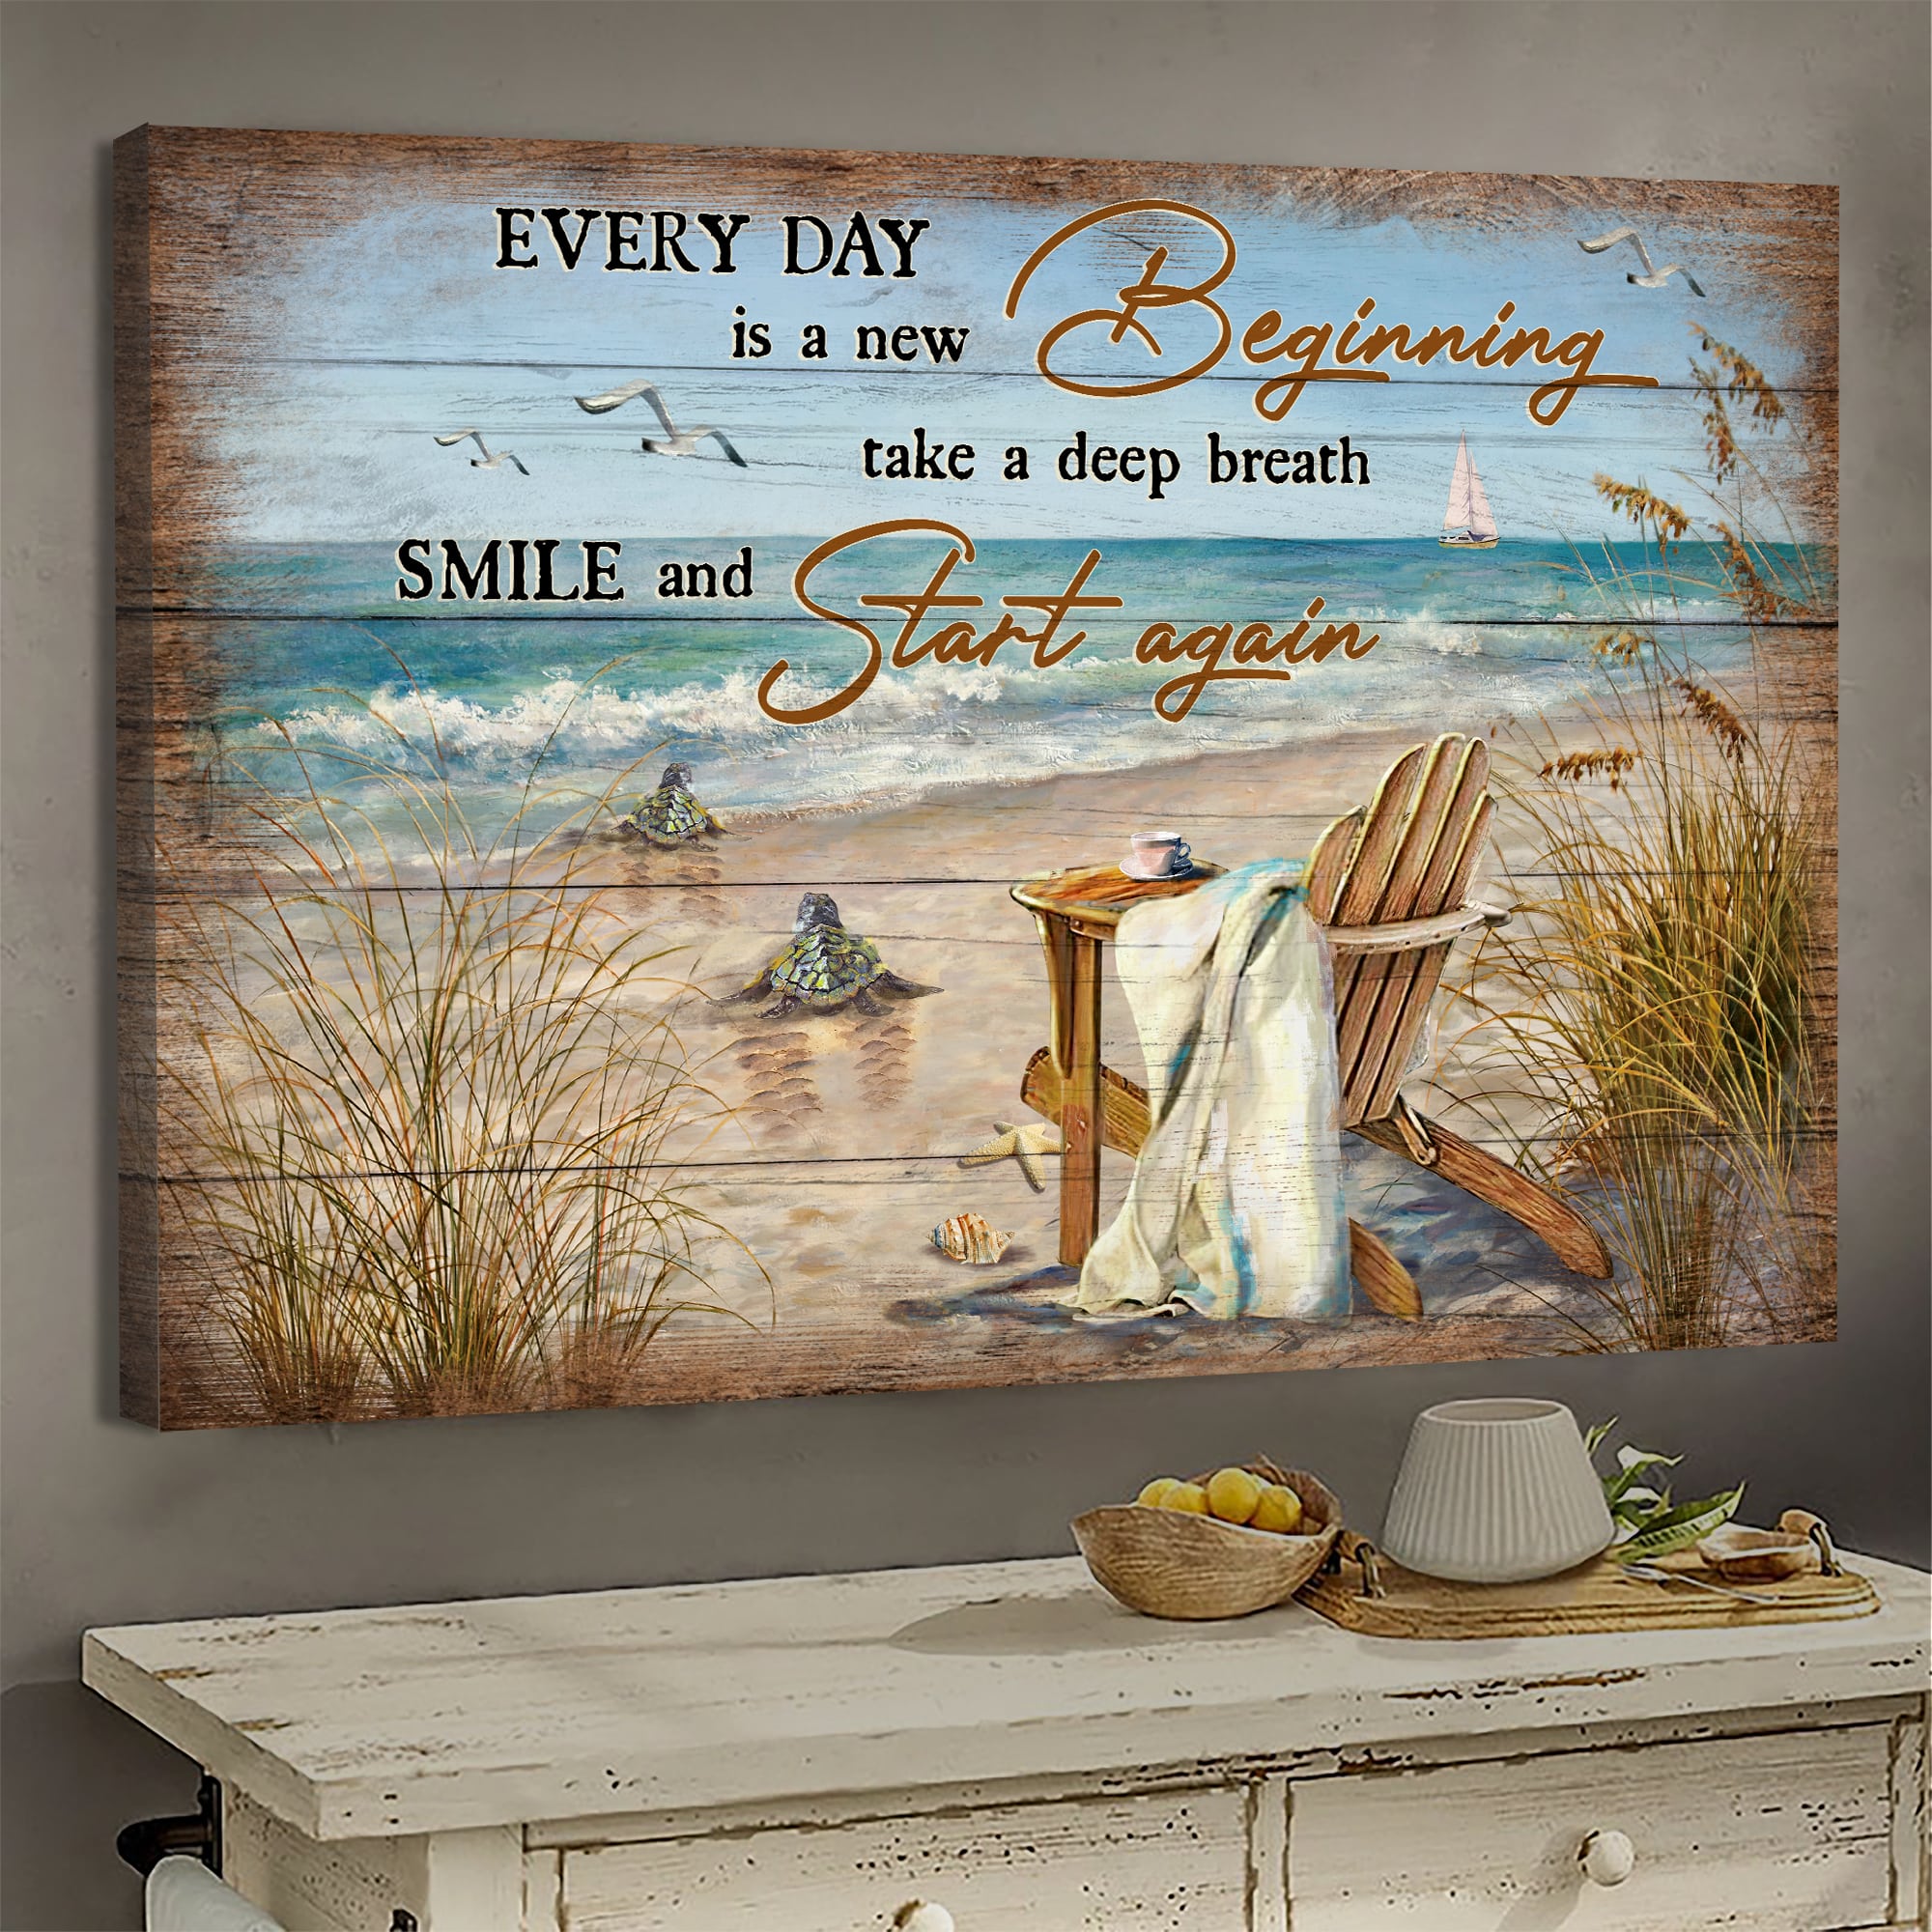 Sea Turtle, On the beach, Every day is a new beginning - Jesus Landscape Canvas Prints, Wall Art